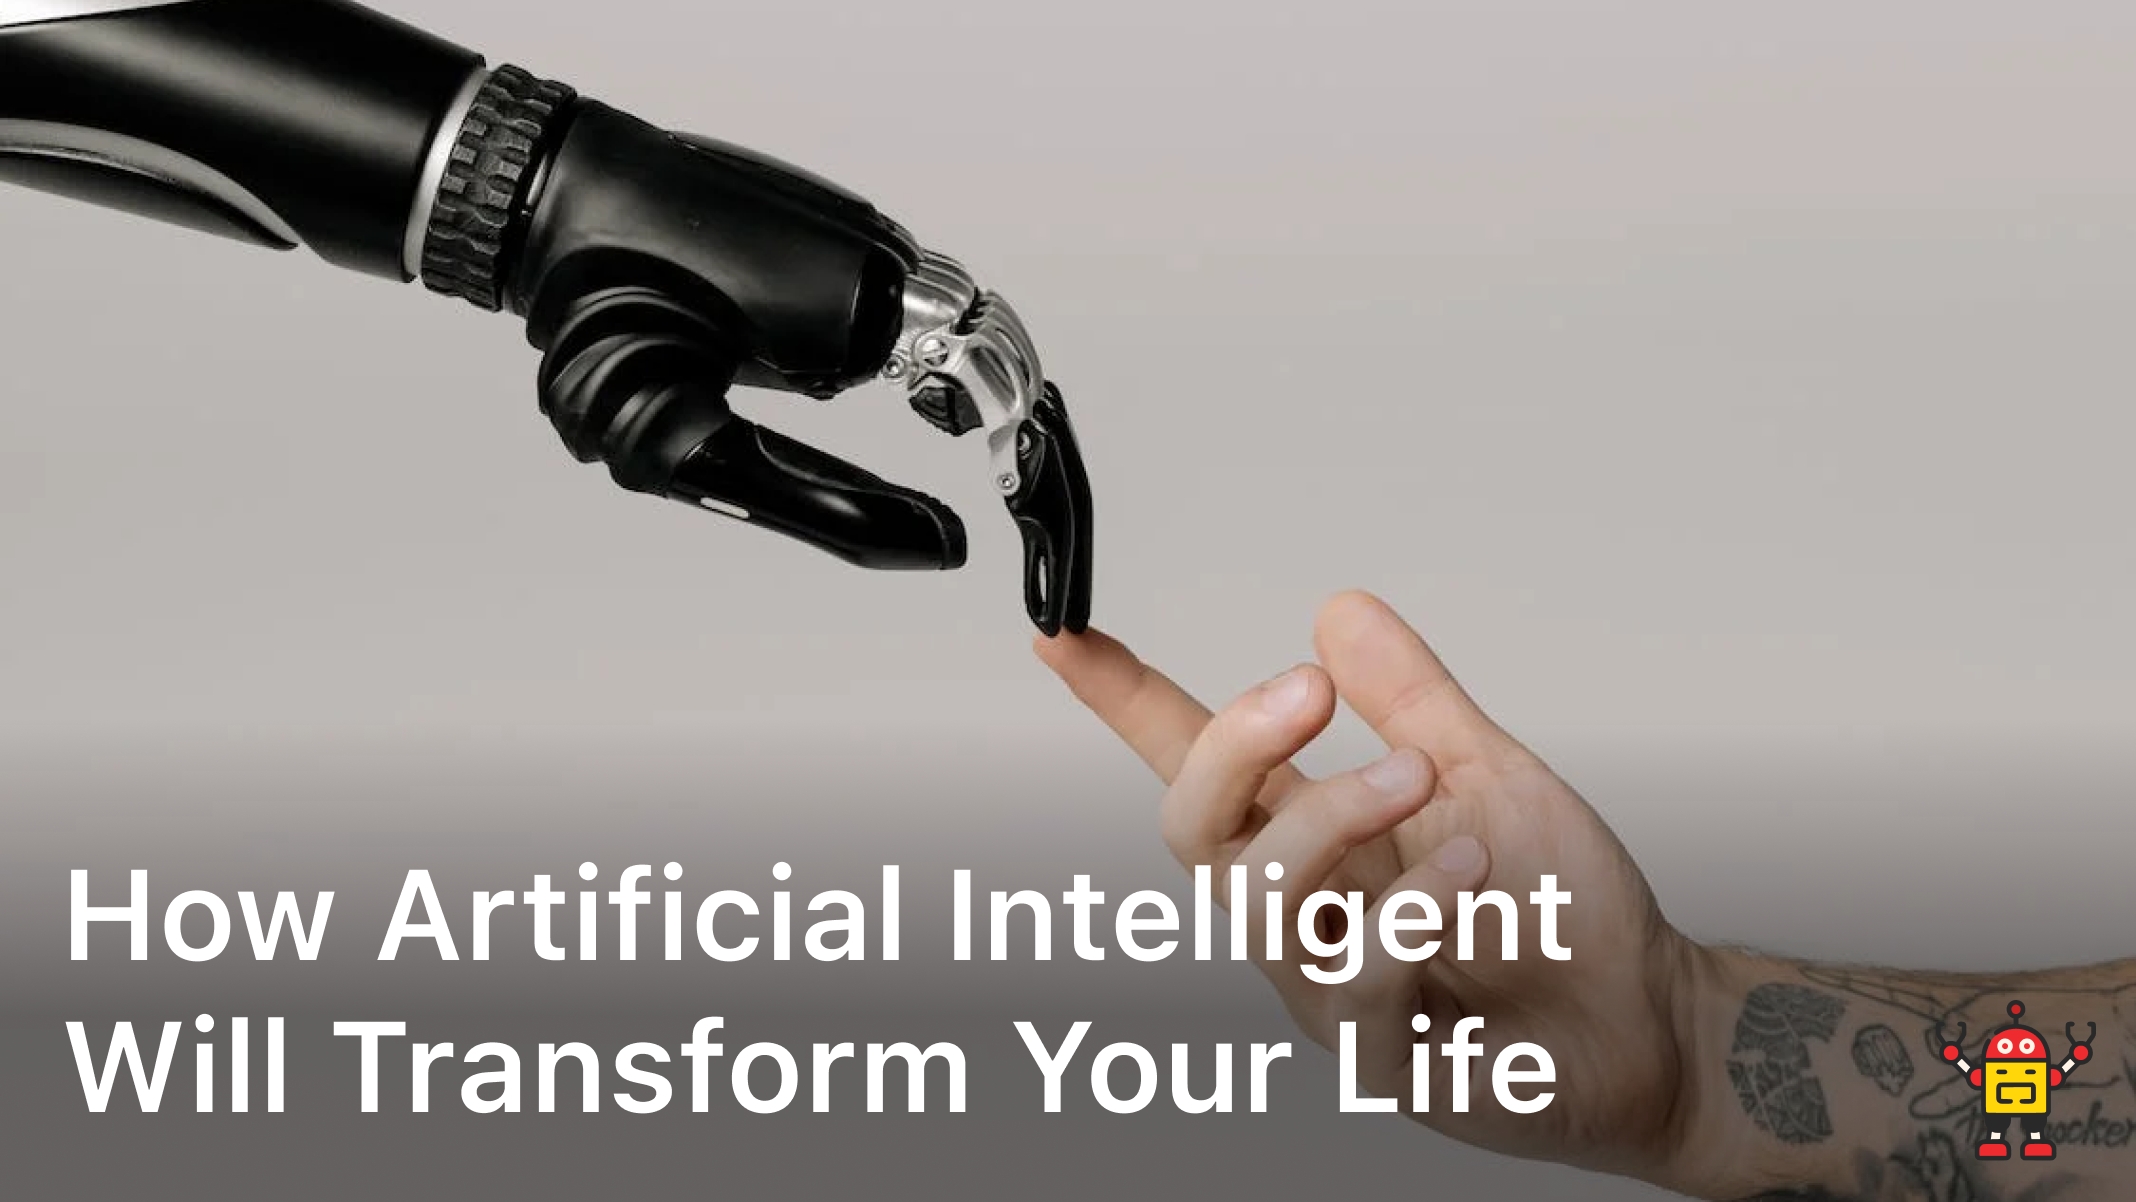 How Artificial Intelligent Will Transform Your Life